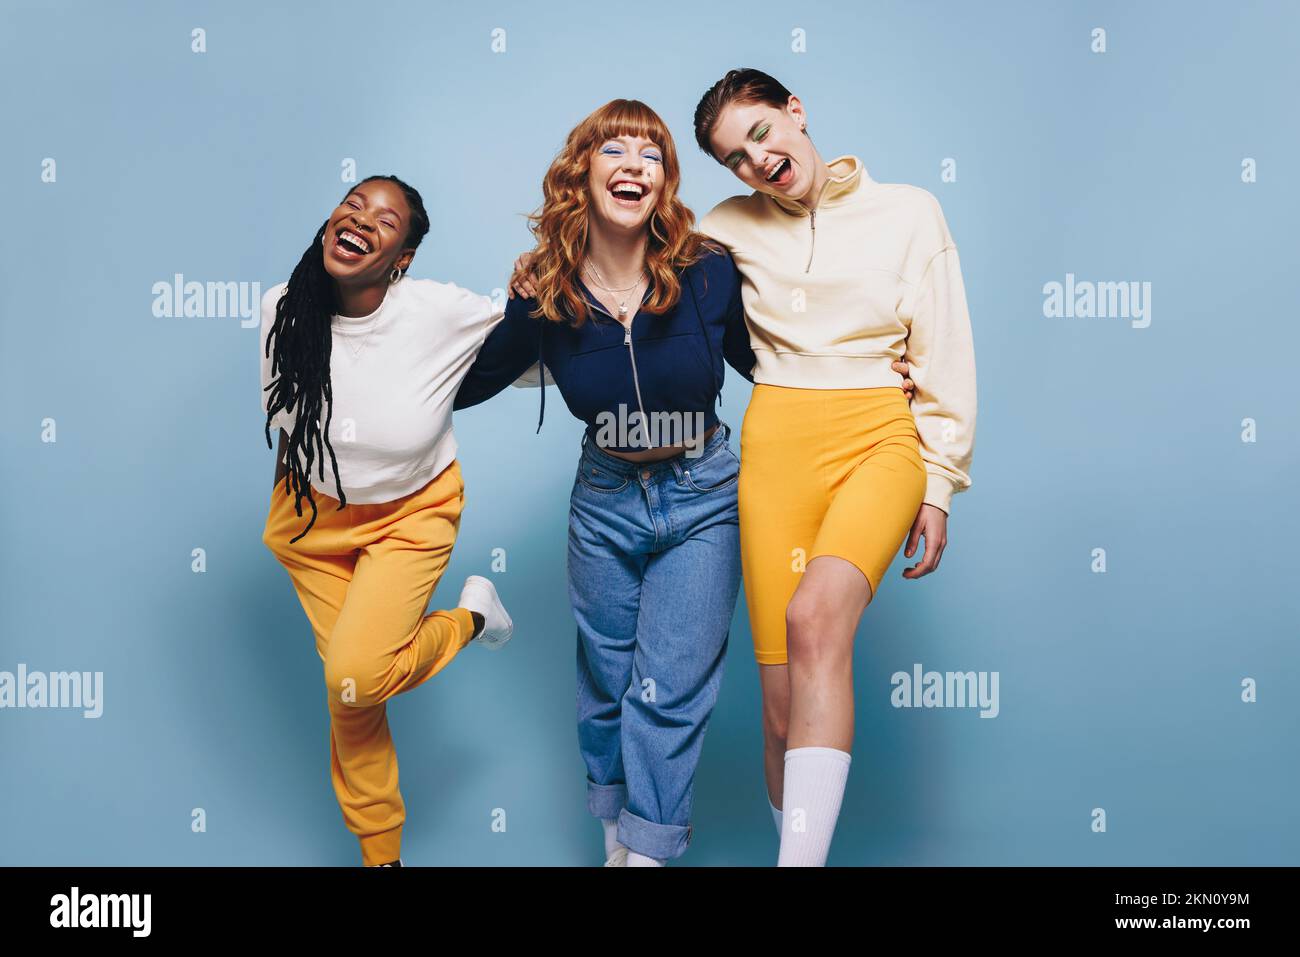 Three female friends laughing happily while embracing each other. Group of cheerful young women having fun while standing together against a blue stud Stock Photo